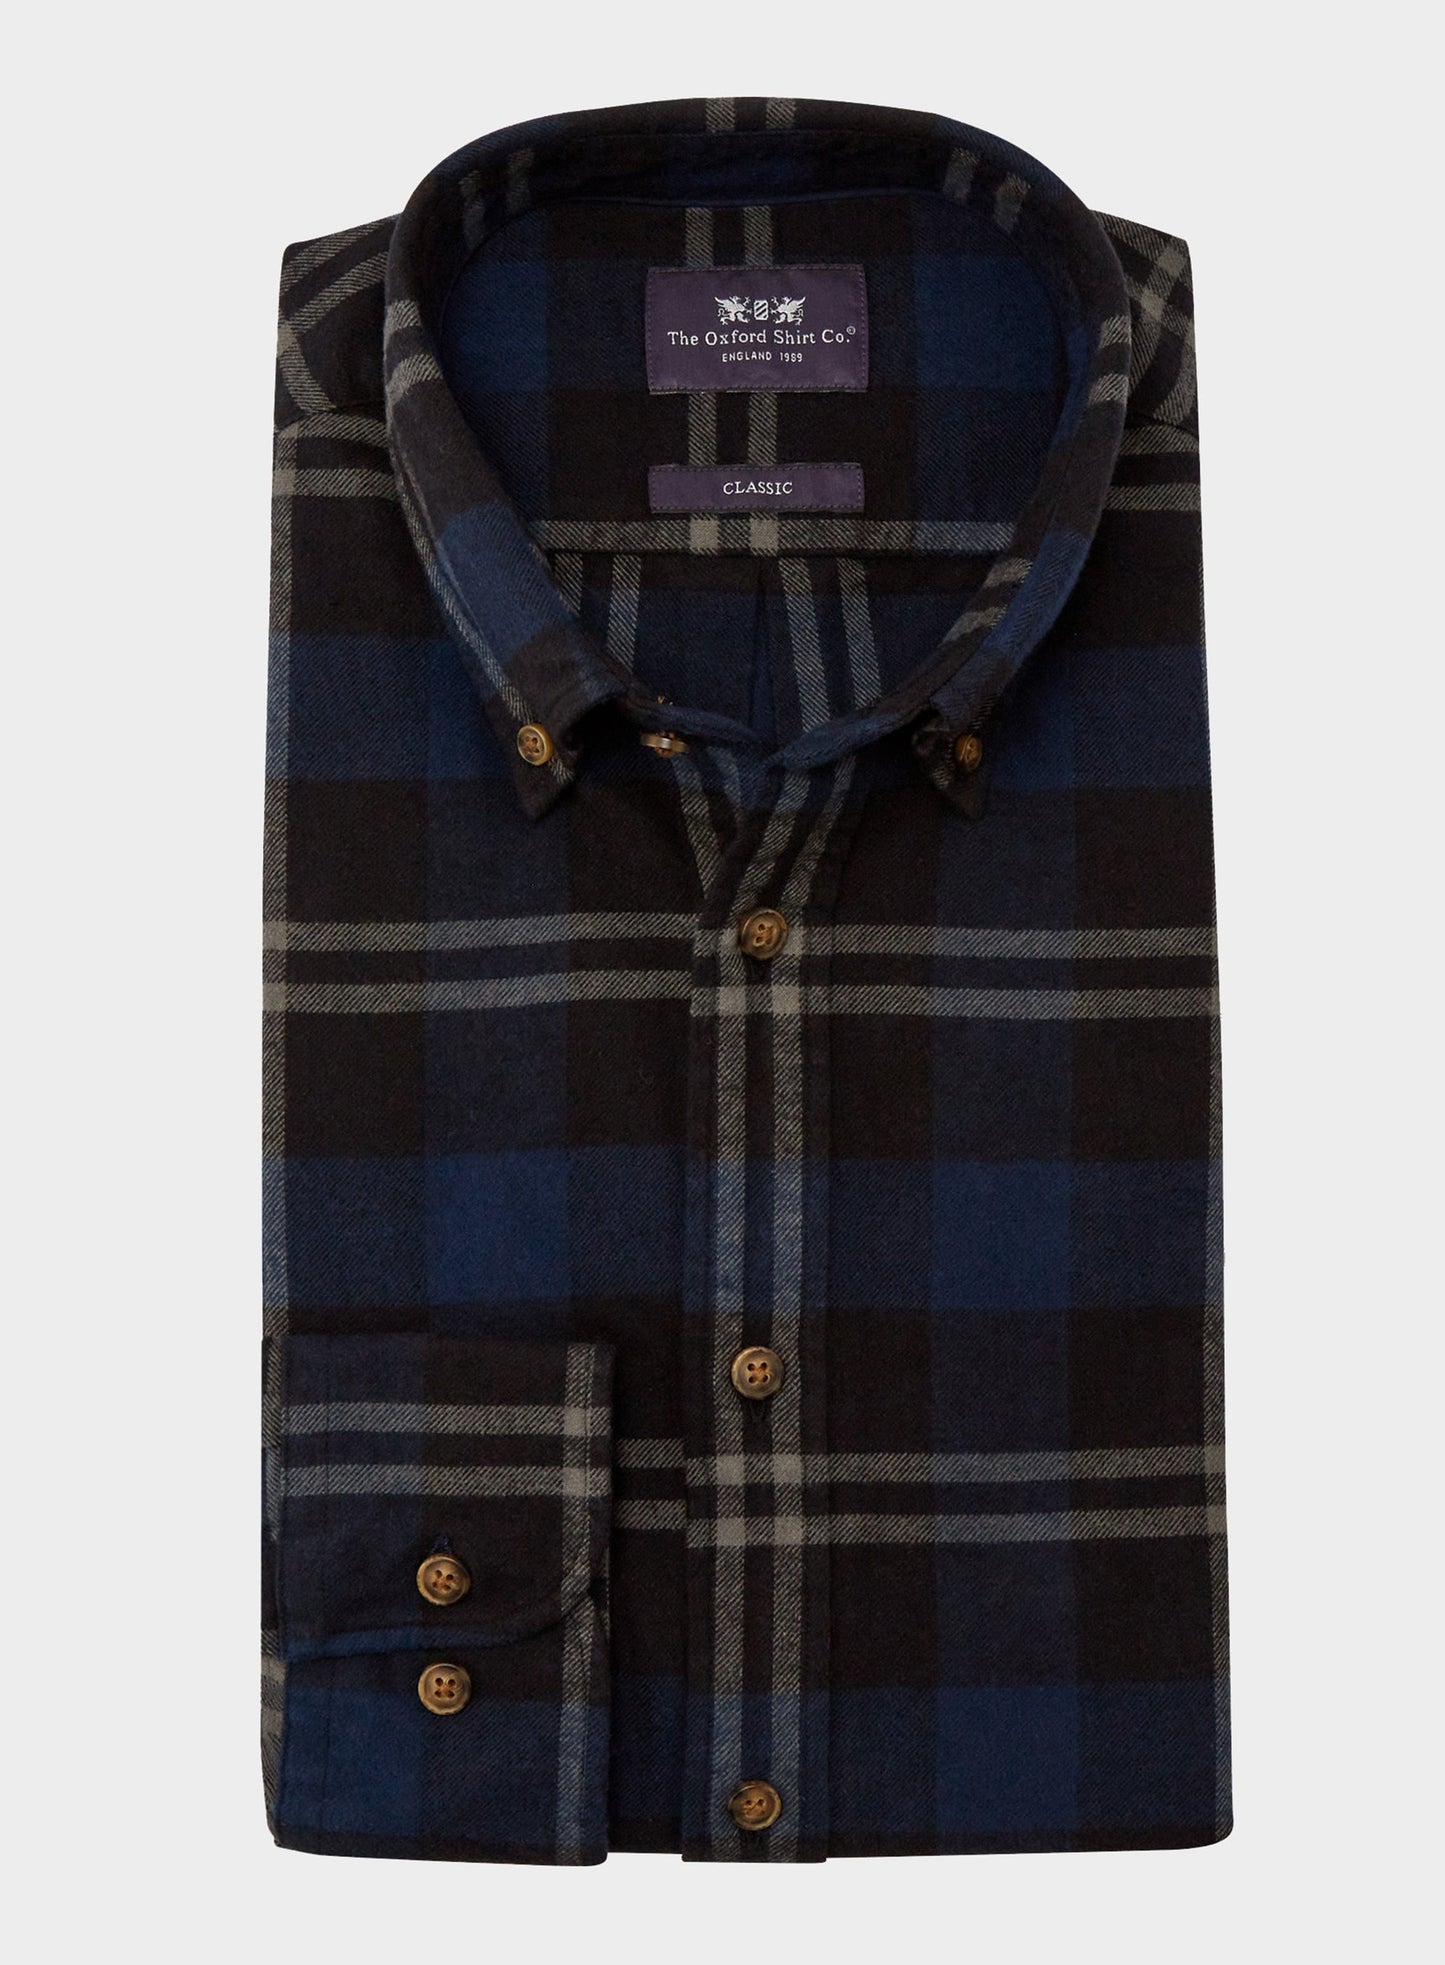 Button Down Flannel Shirt - Blue and Navy Check